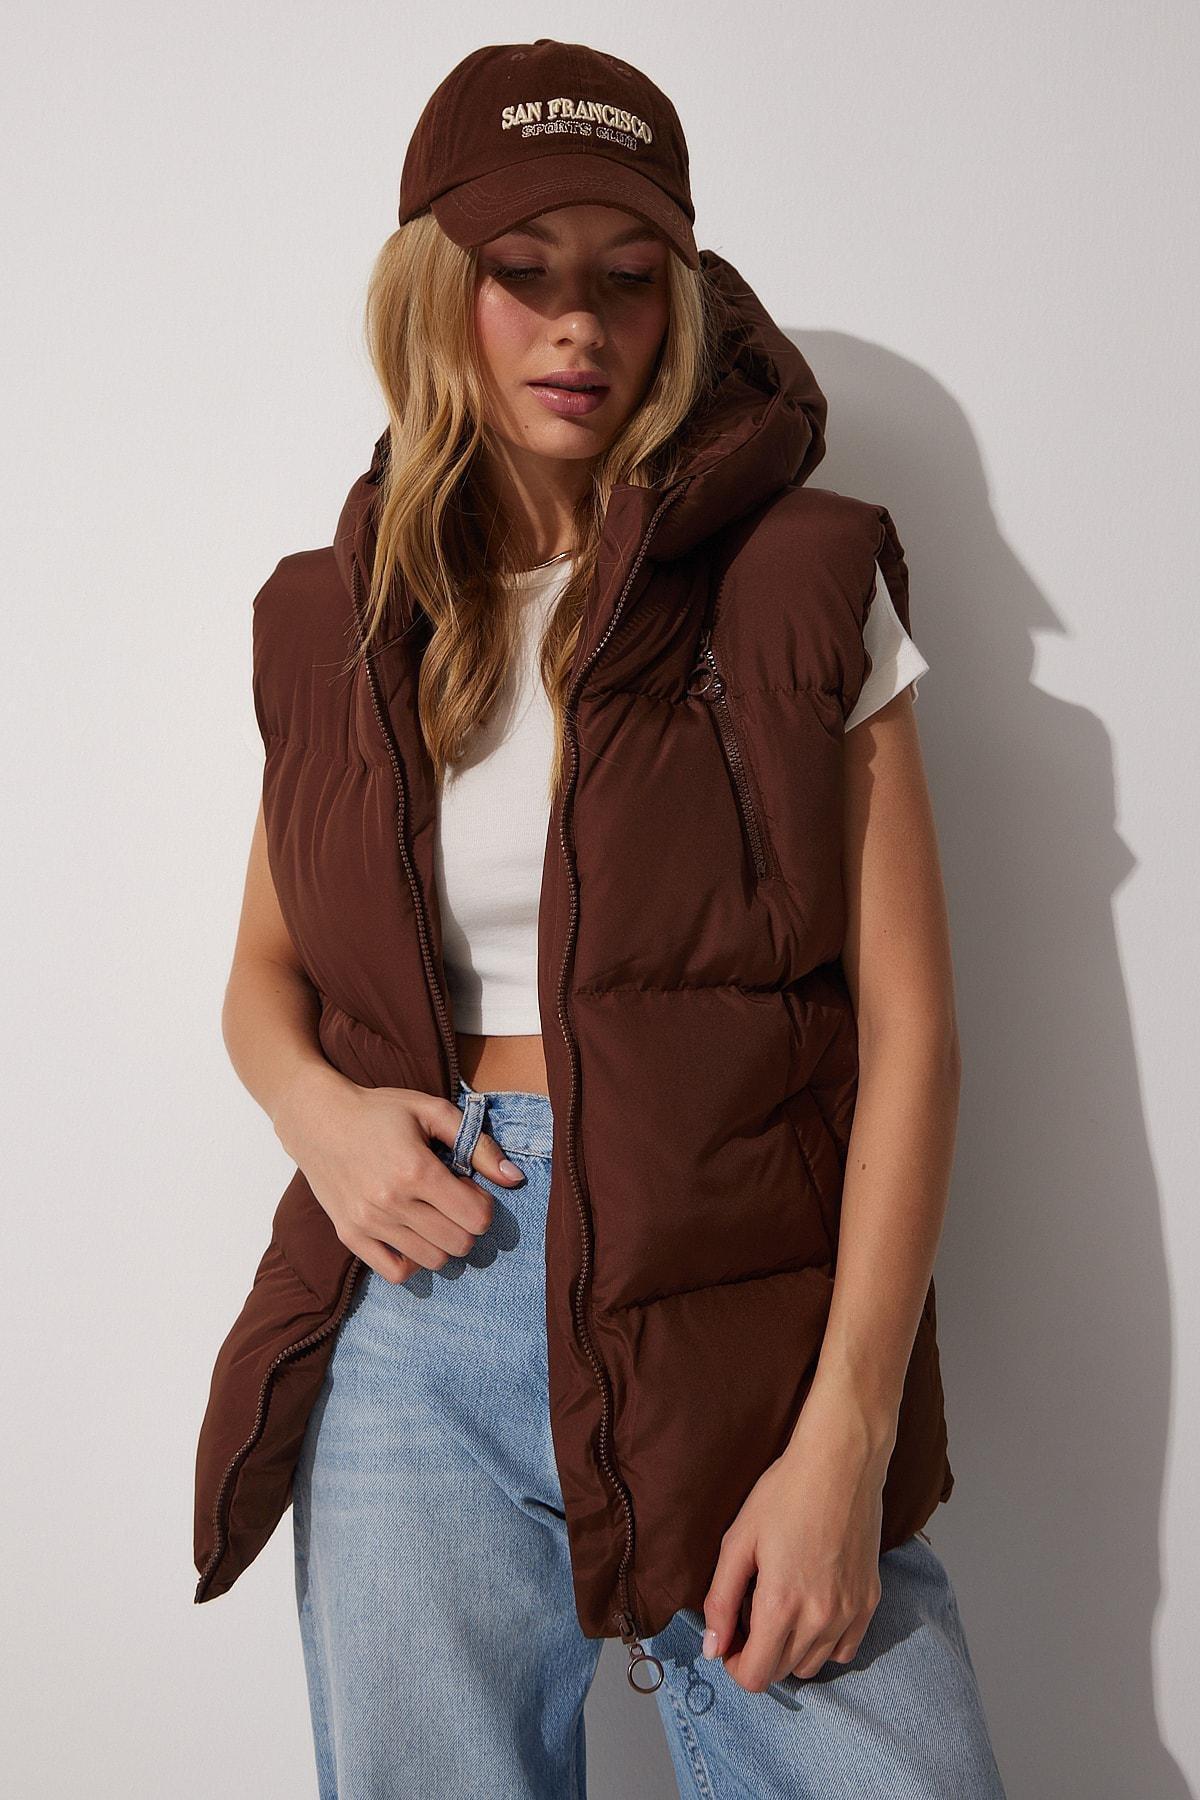 Happiness Istanbul - Brown Hooded Puffer Vest